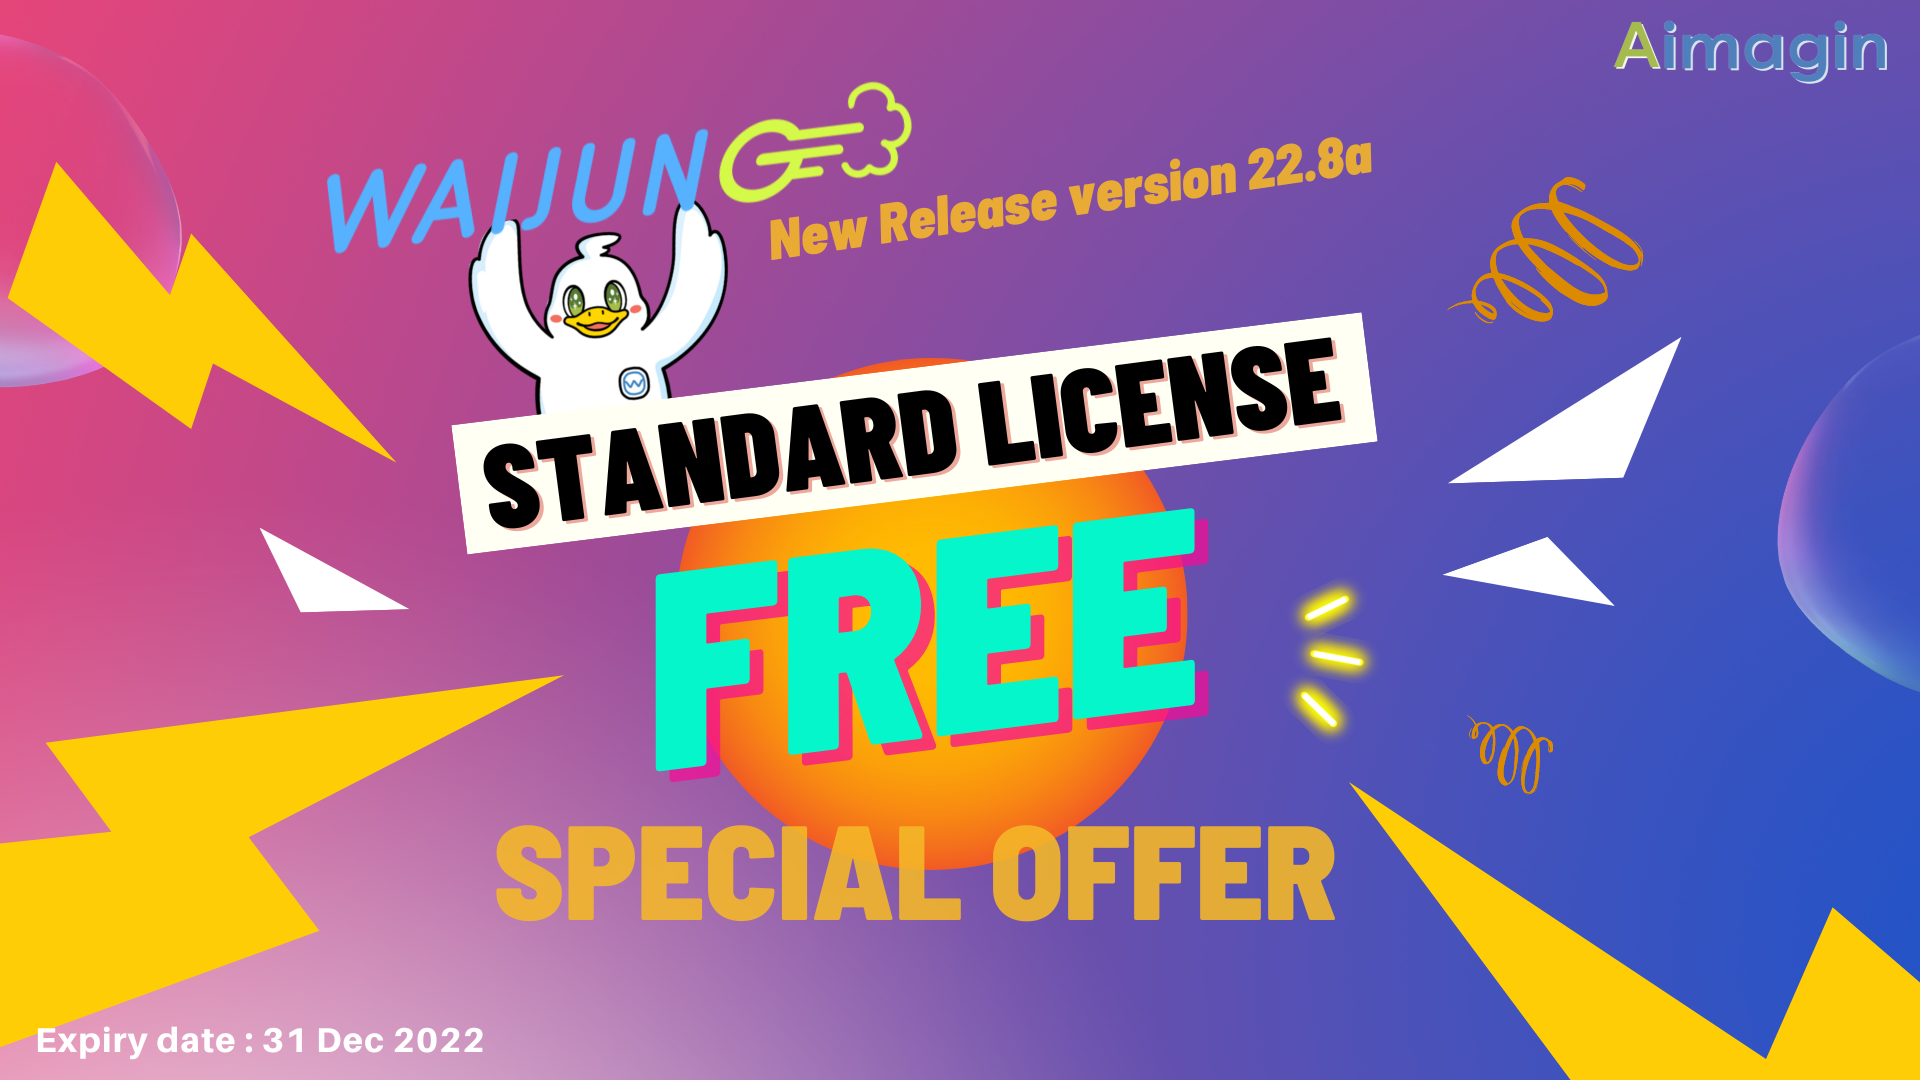  100% discount with Waijung 2 version 22.8a